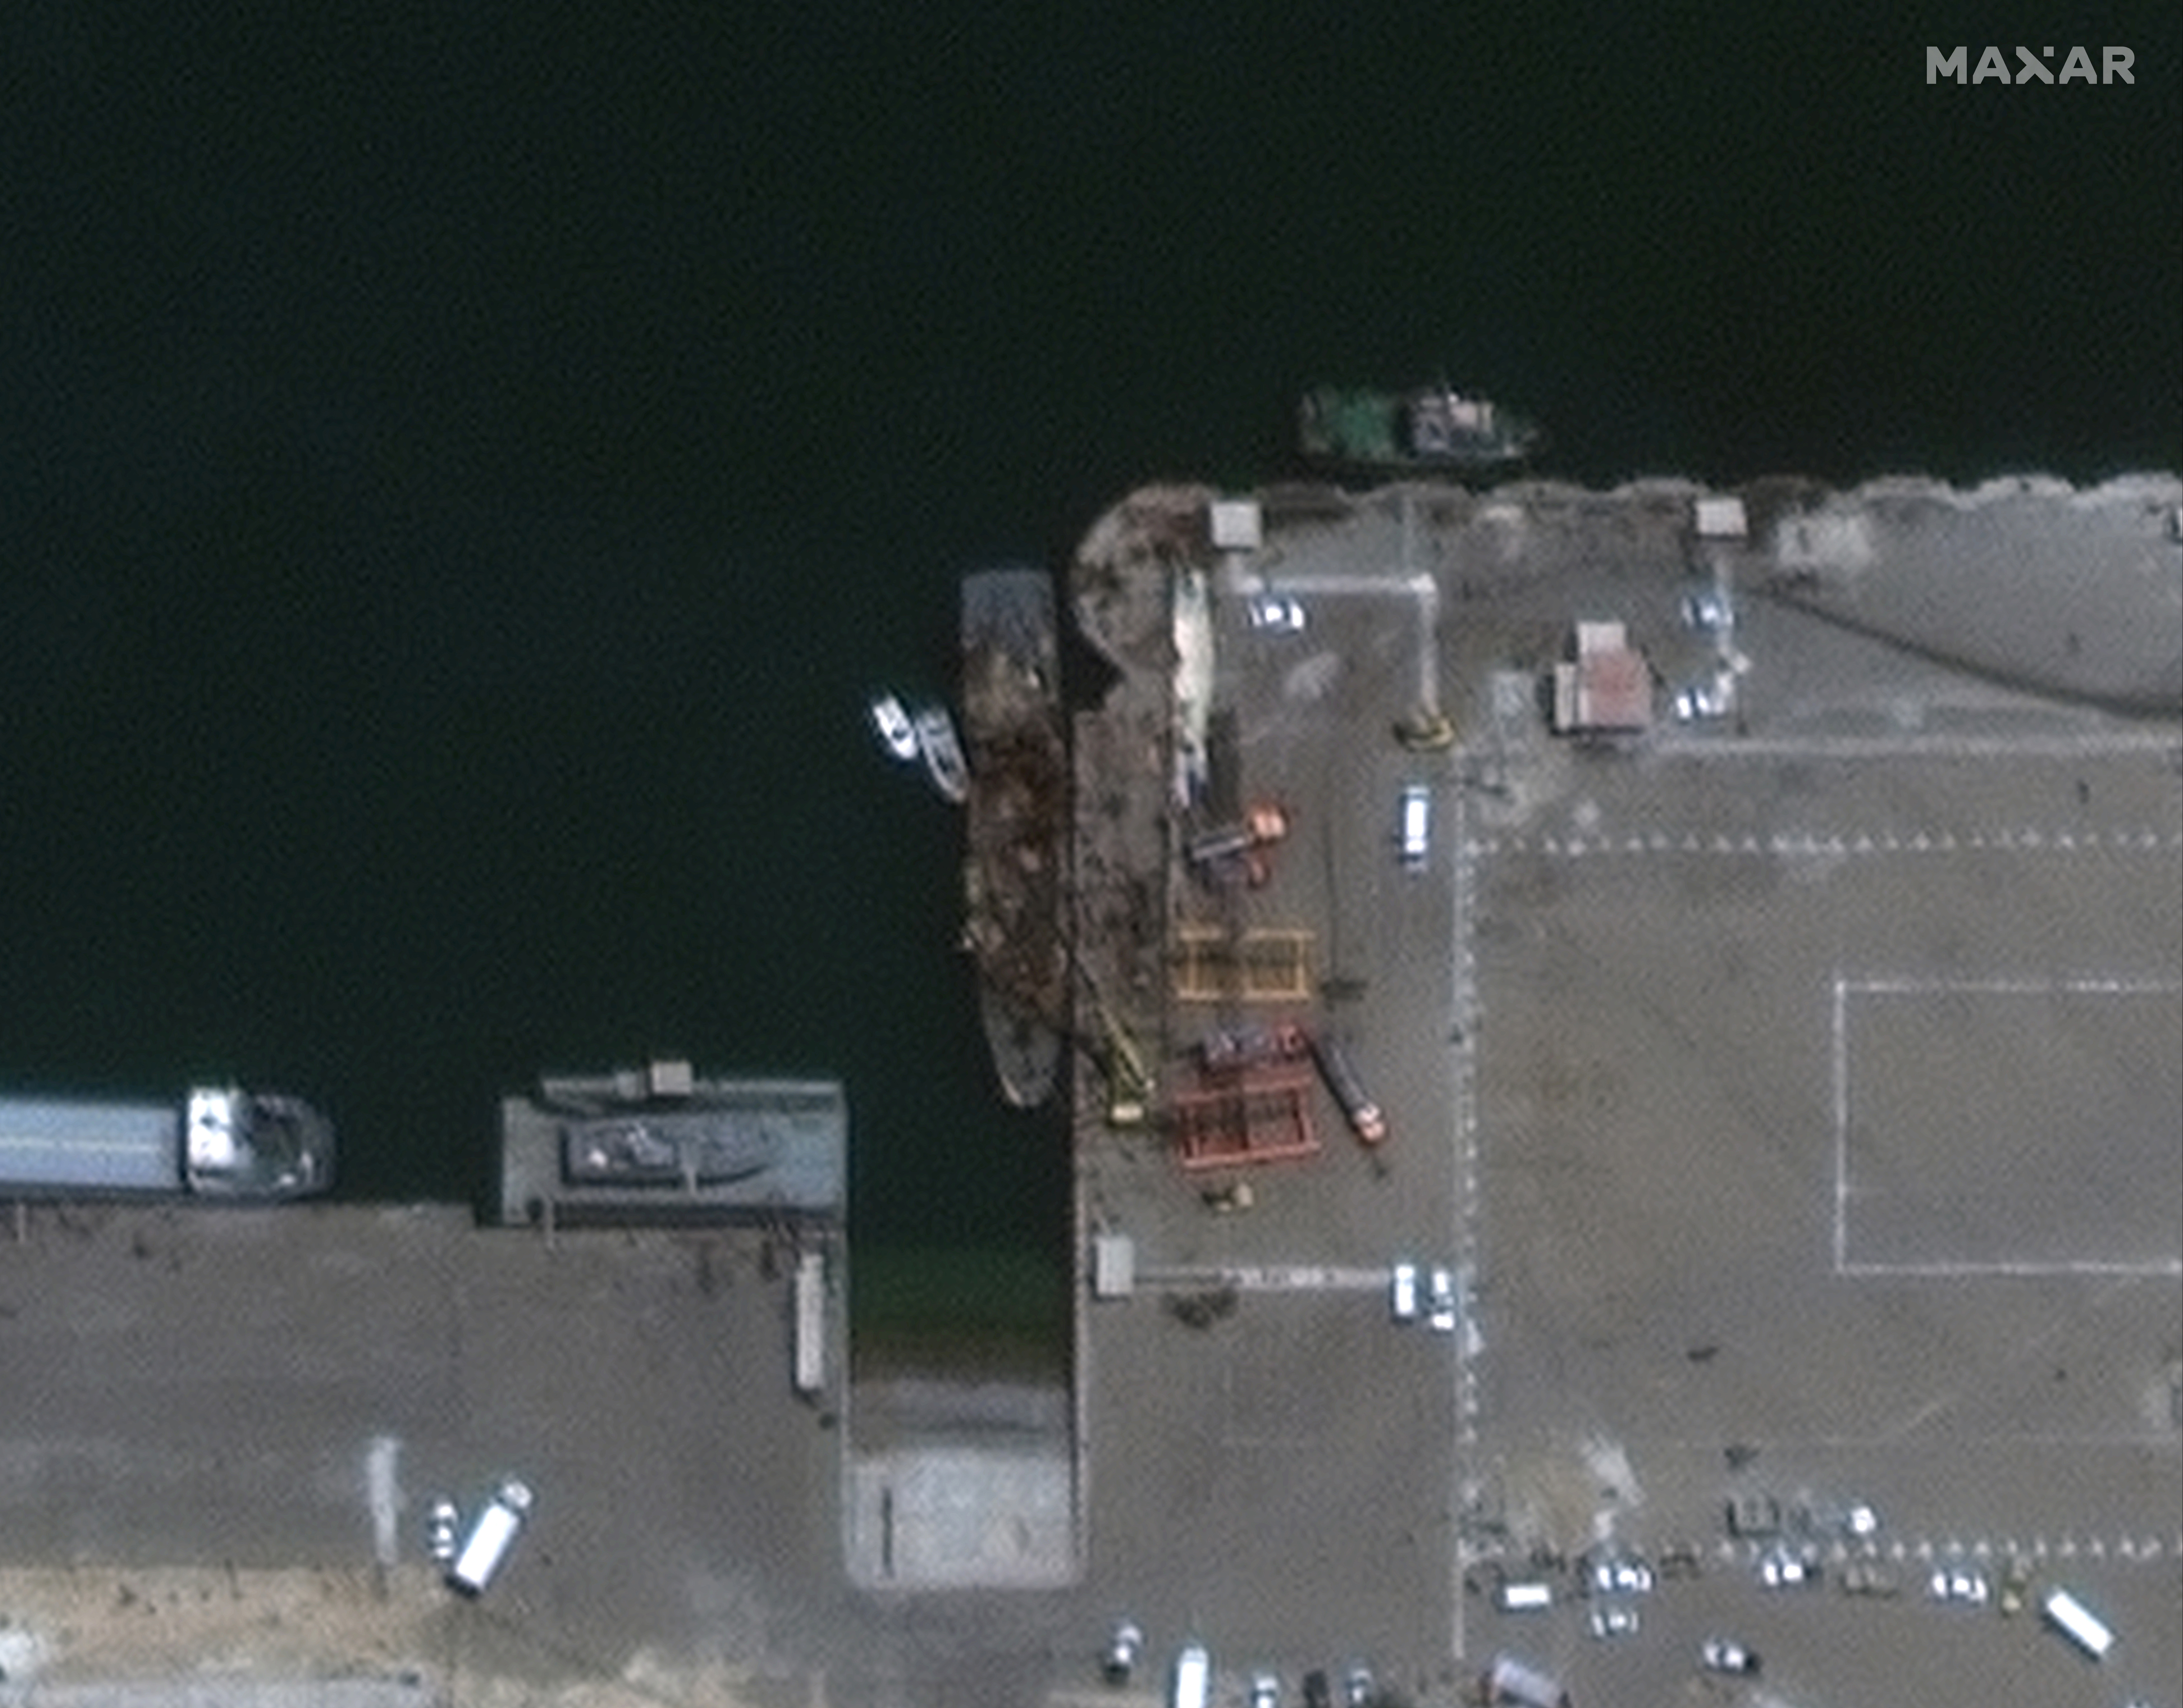 In this satellite photo provided by Maxar Technologies, the Iranian naval support vessel Konarak, center, is tied up at the port in Konarak, Iran